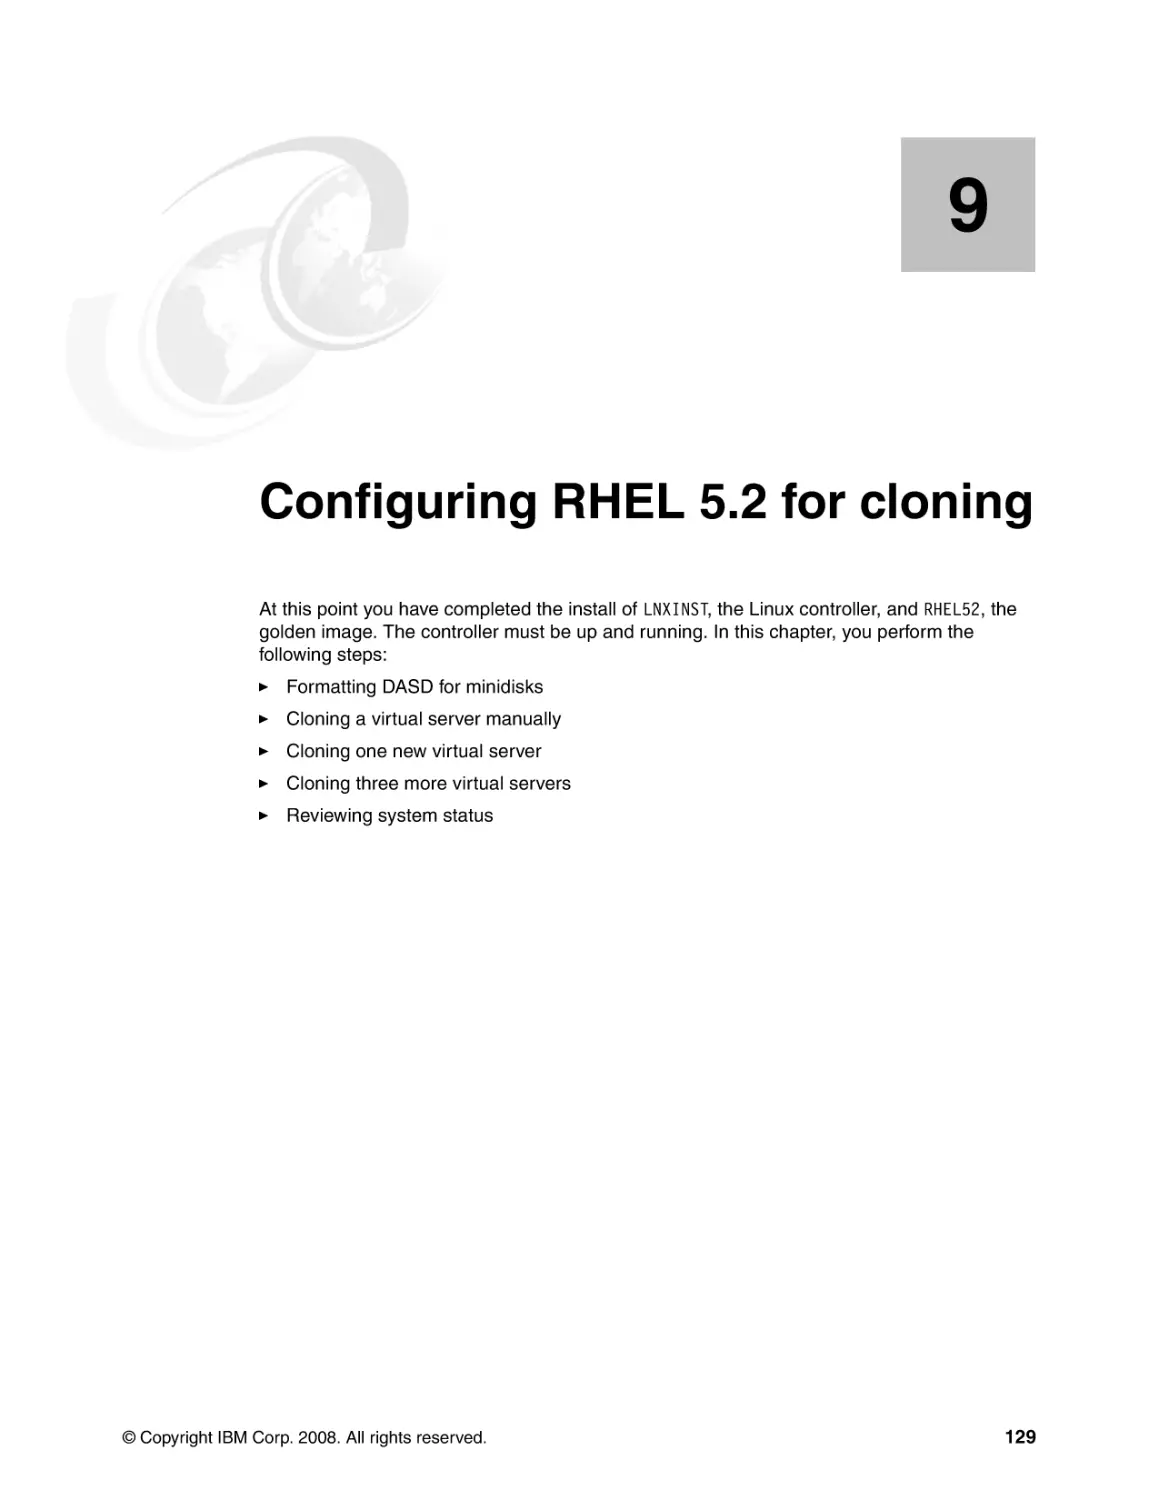 Chapter 9. Configuring RHEL 5.2 for cloning